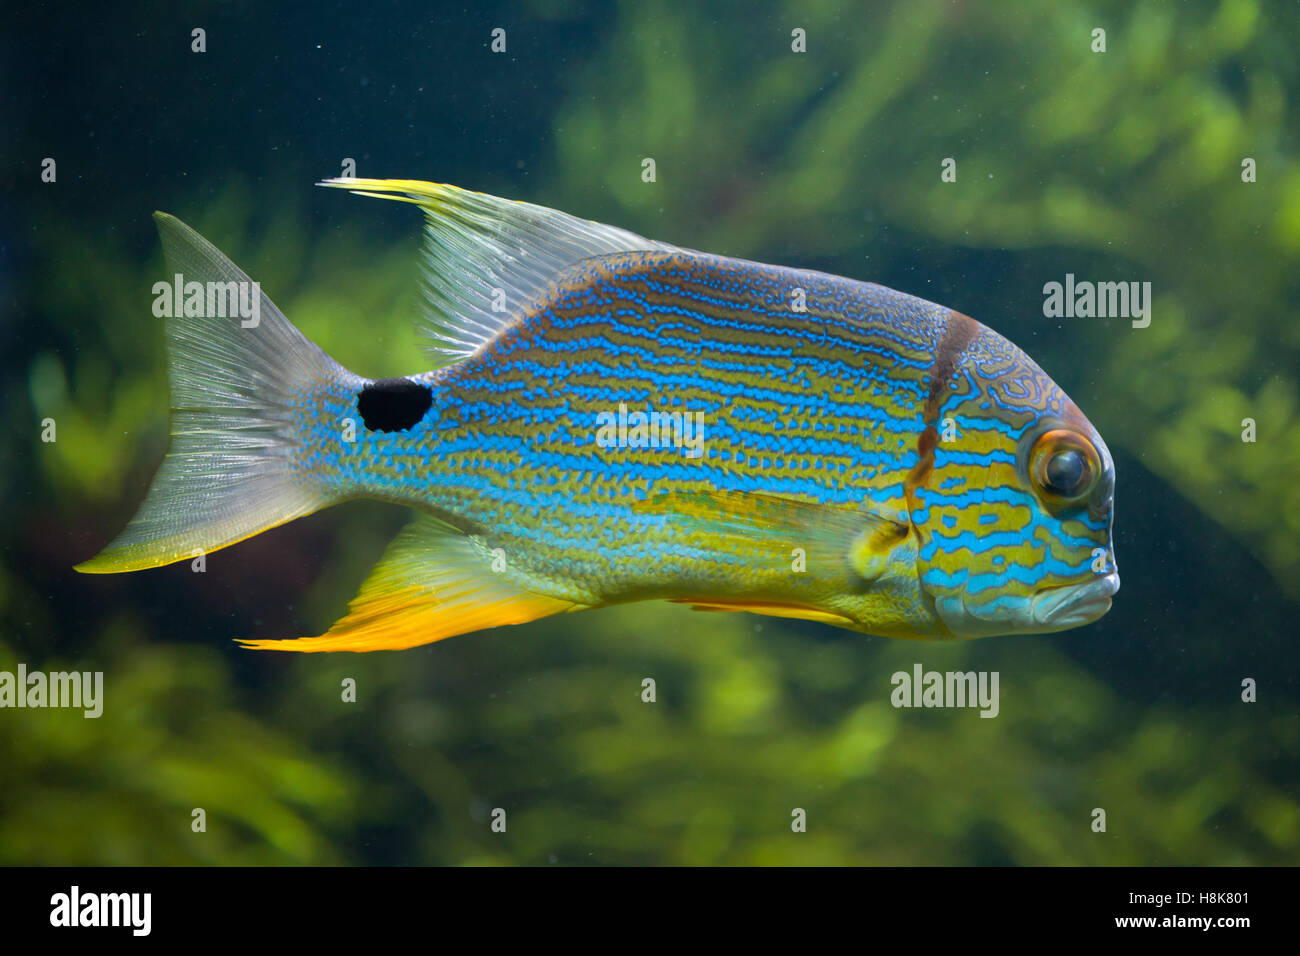 Sailfin snapper (Symphorichthys spilurus), also known as the blue-lined sea bream. Stock Photo